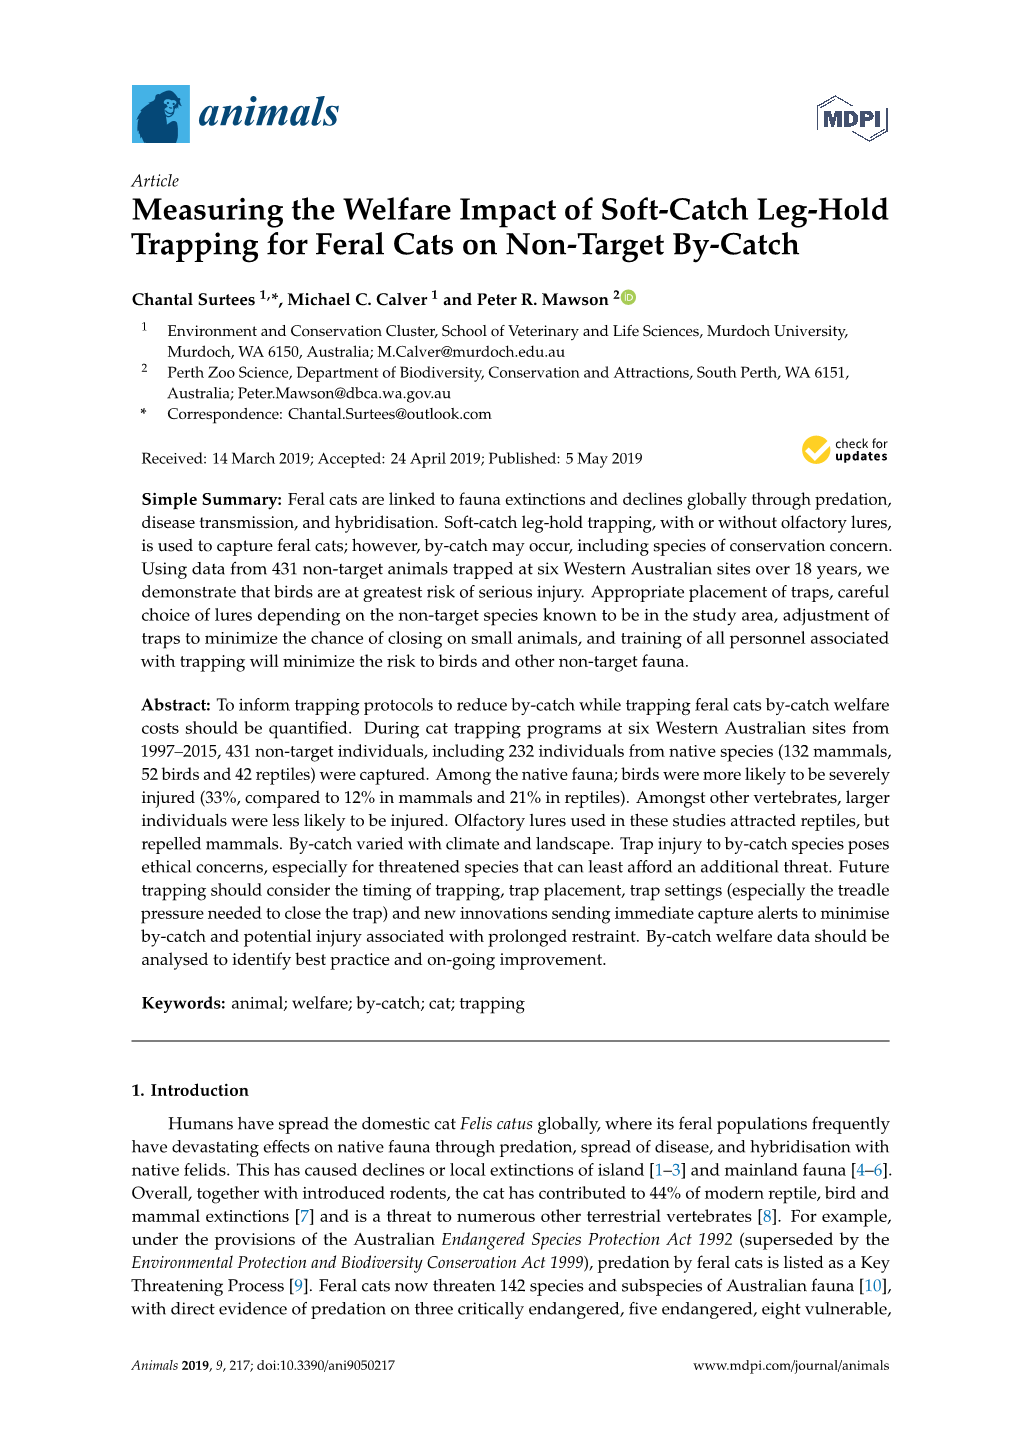 Measuring the Welfare Impact of Soft-Catch Leg-Hold Trapping for Feral Cats on Non-Target By-Catch